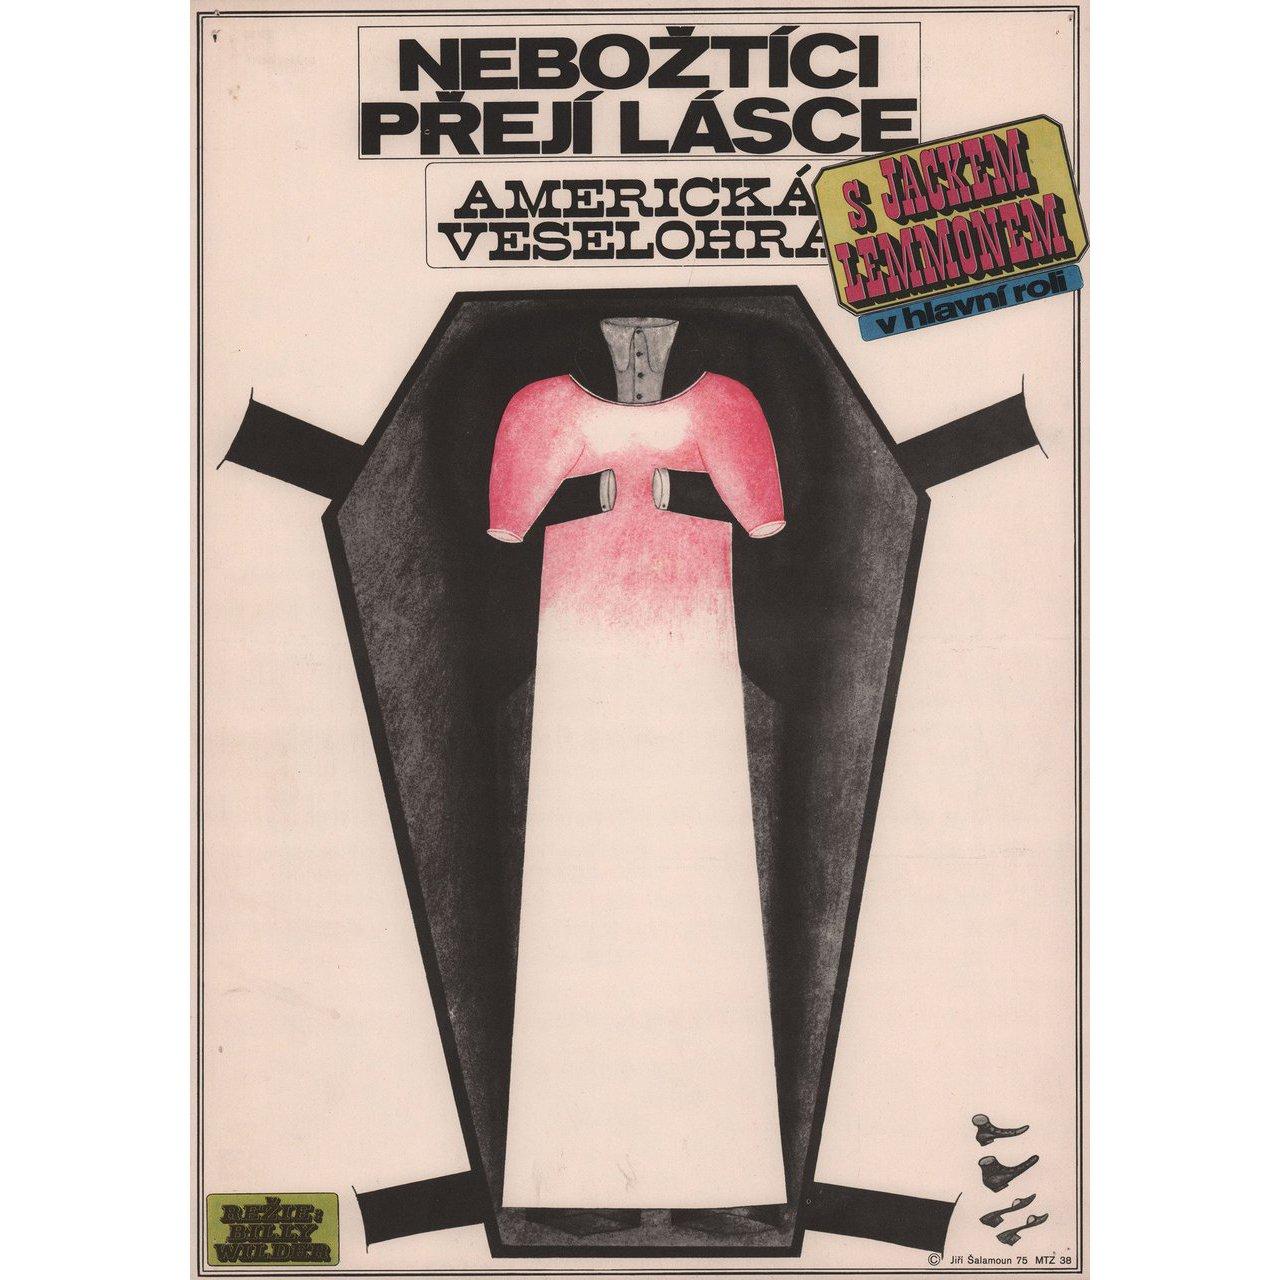 Original 1975 Czech A3 poster by Jiri Salamoun for. Very good-fine condition, folded. Many original posters were issued folded or were subsequently folded. Please note: the size is stated in inches and the actual size can vary by an inch or